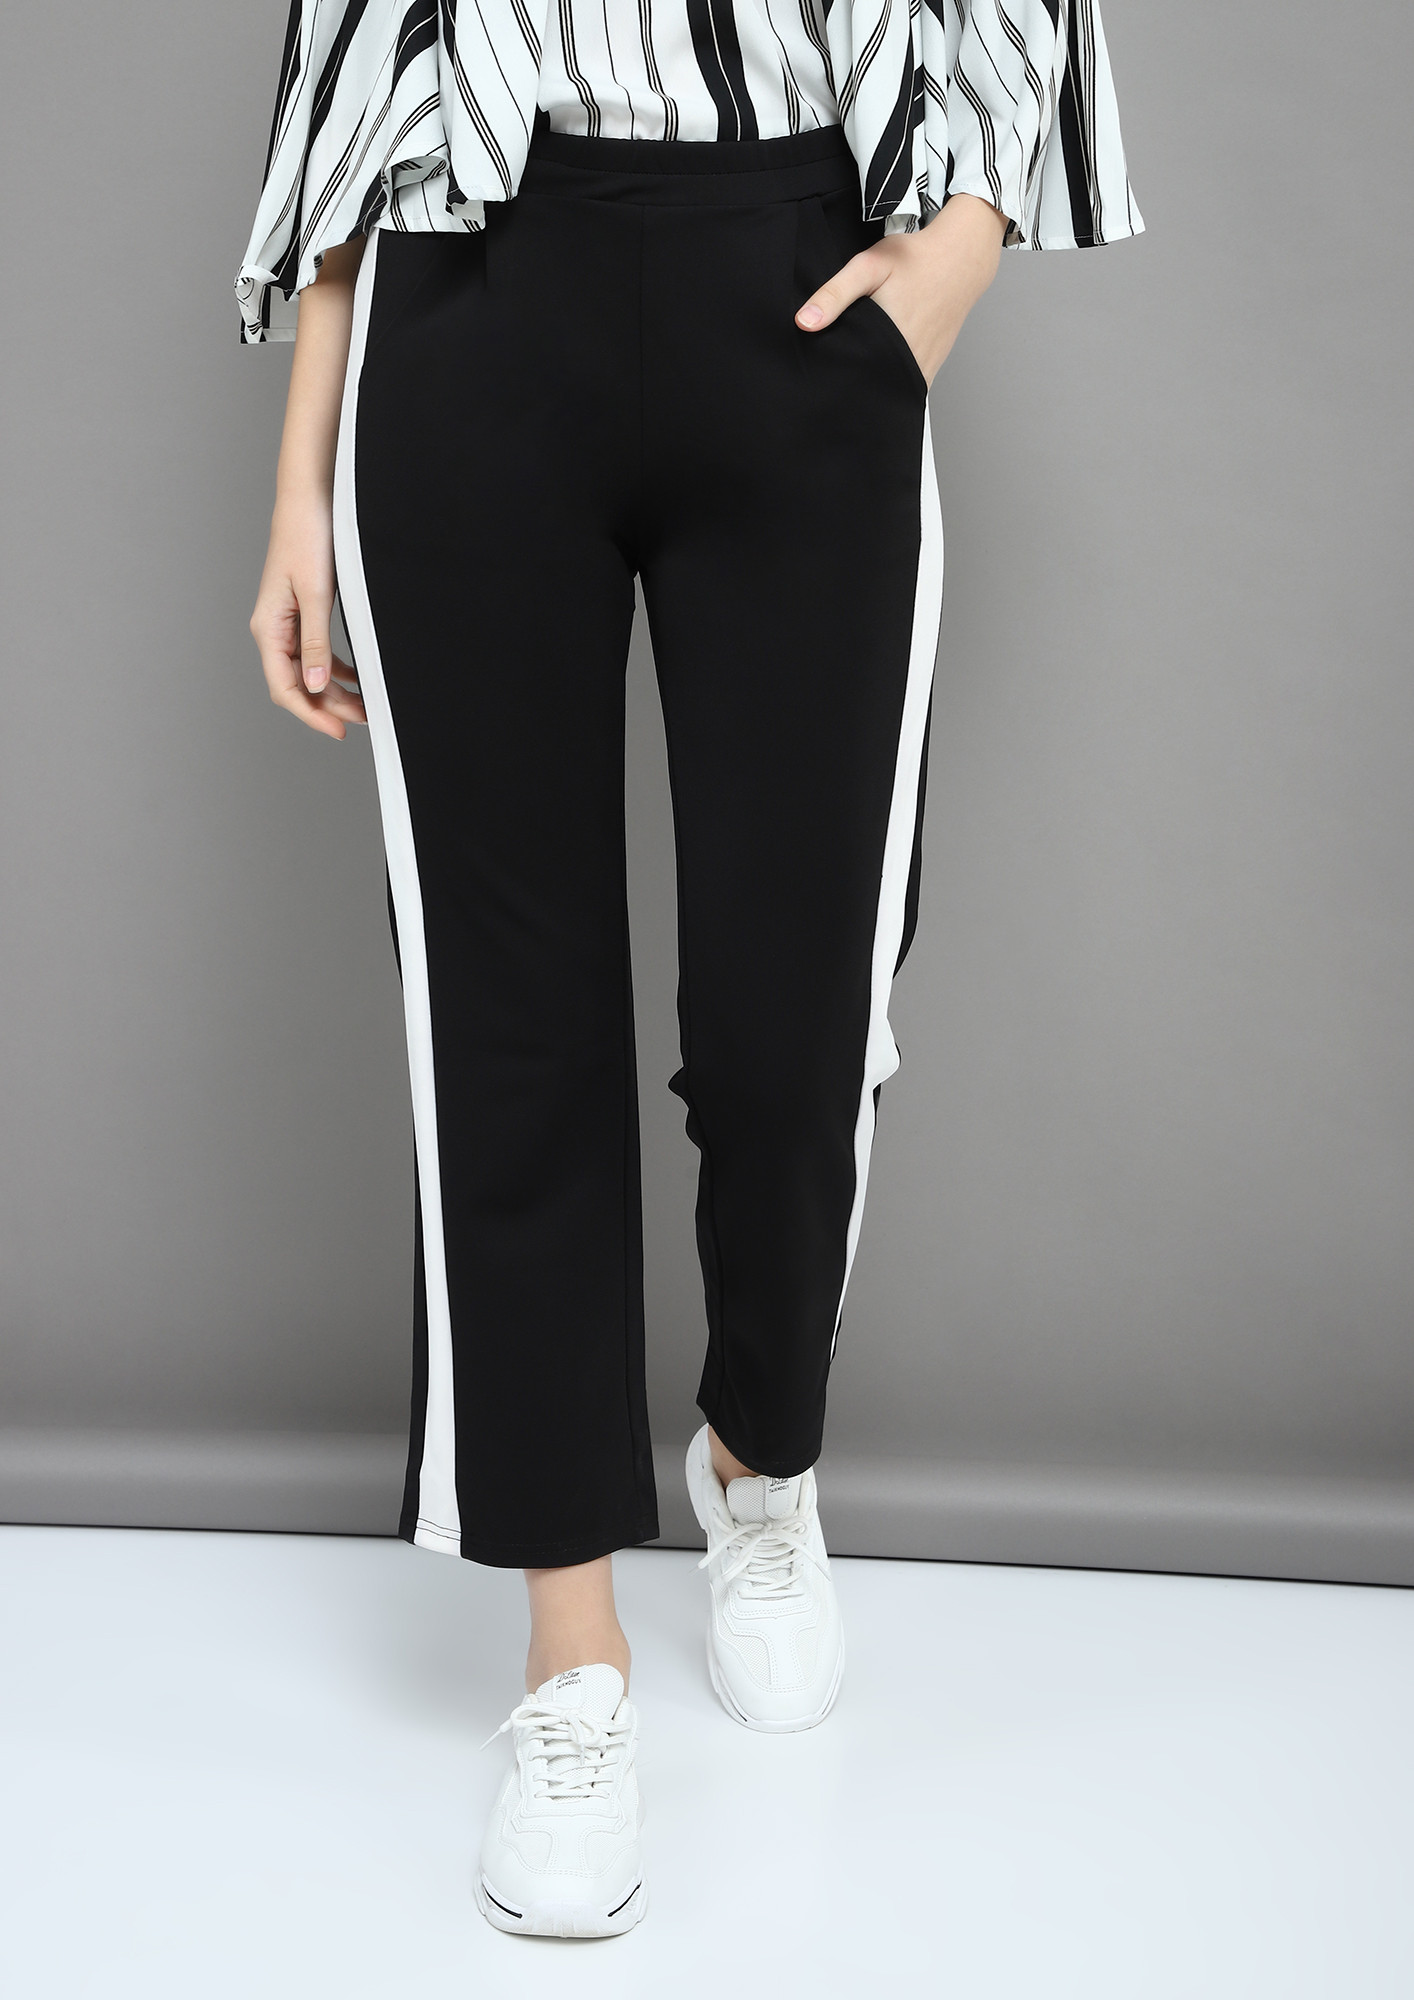 CARED TO FLARE BLACK FLARED TROUSERS